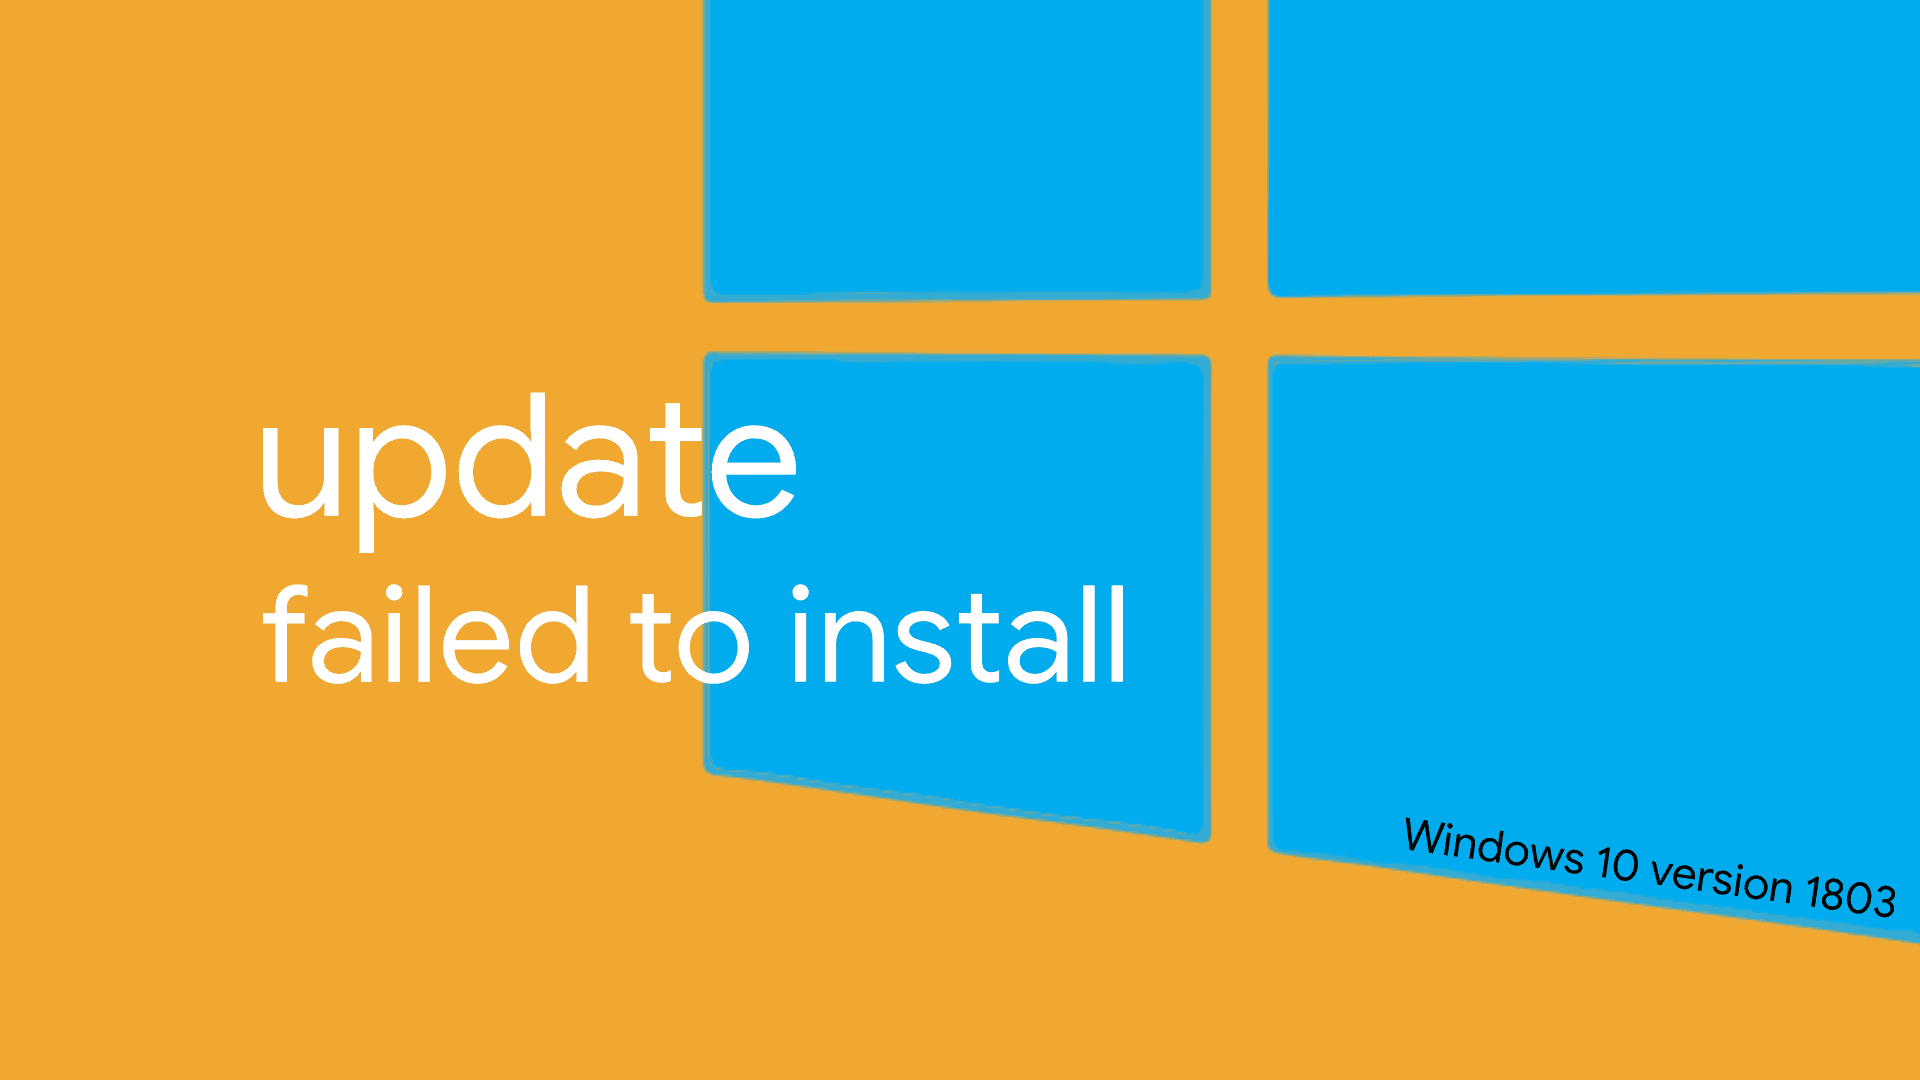 Windows 10 version 1803 KB4487017 update failed to install? Here's a fix